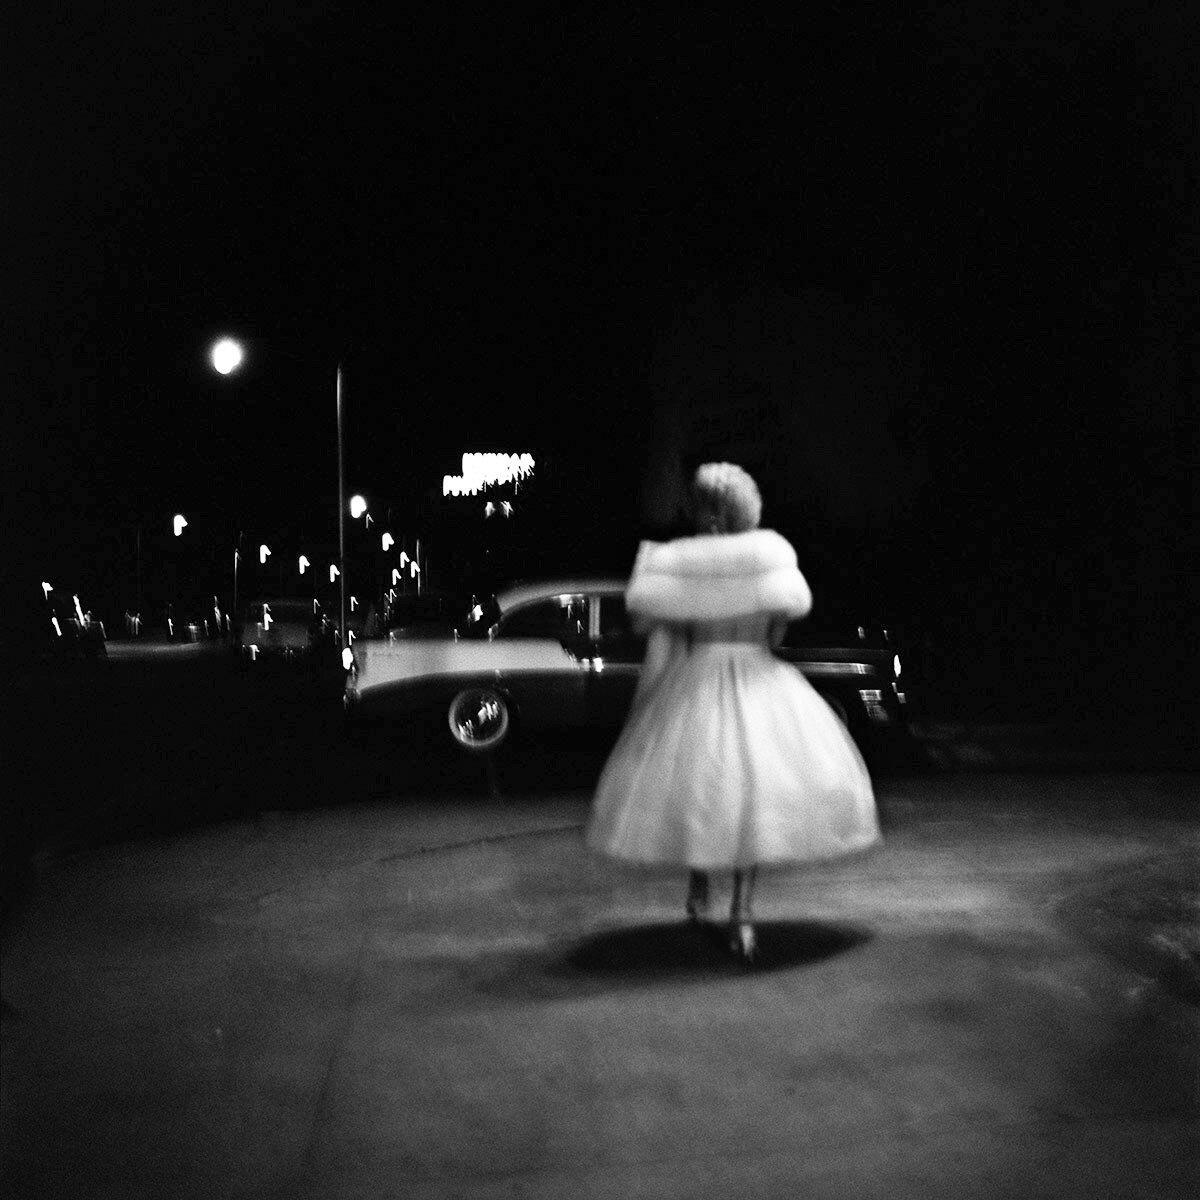 Vivian Maier walked the streets at night capturing subjects in motion, such as this woman in white.